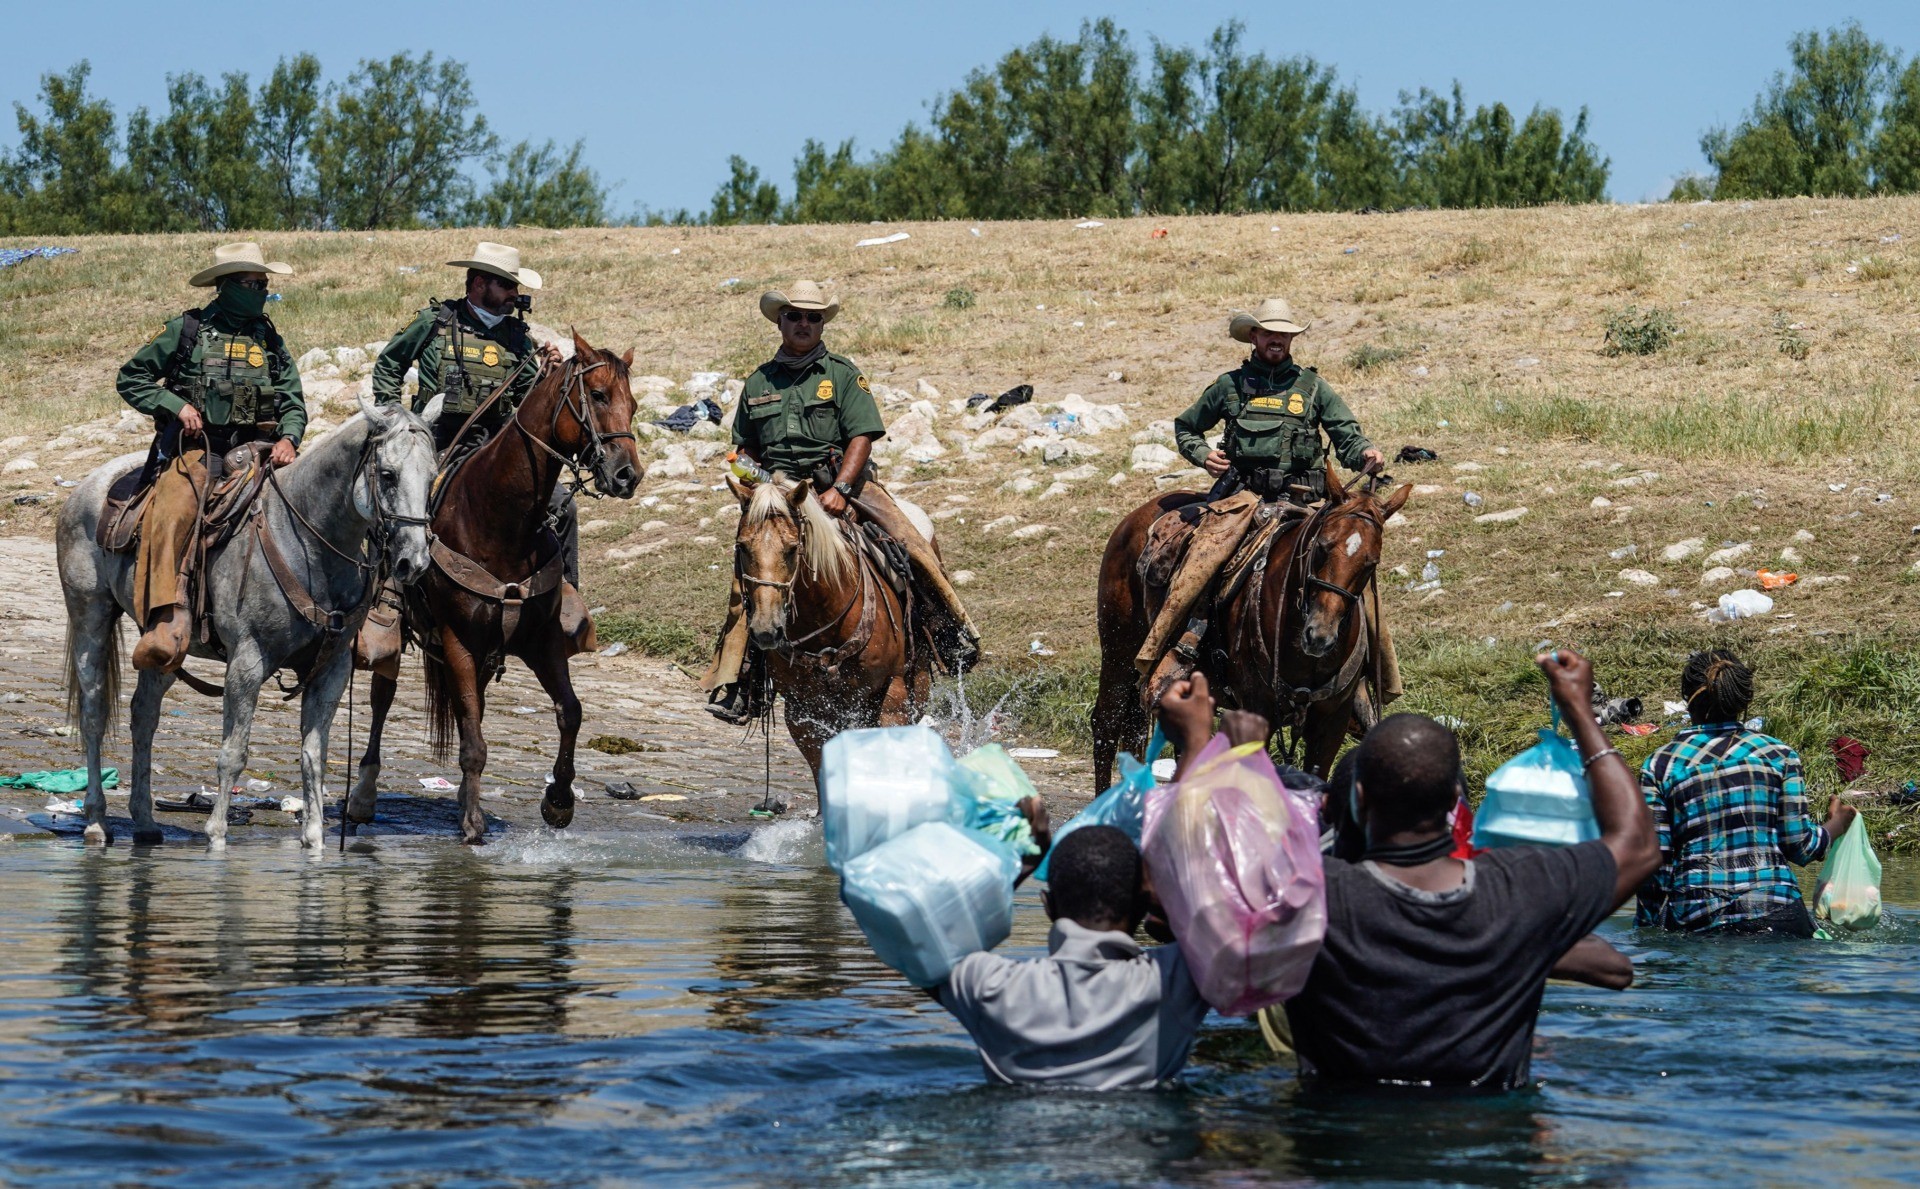 United States Border Patrol agents on horseback try to stop Haitian migrants from entering an encampment on the banks of the Rio Grande near the Acuna Del Rio International Bridge in Del Rio, Texas on September 19, 2021. - US law enforcement are attempting to close off crossing points along the Rio Grande river where migrants cross to get food and water, which is scarce in the encampment. The United States said Saturday it would ramp up deportation flights for thousands of migrants who flooded into the Texas border city of Del Rio, as authorities scramble to alleviate a burgeoning crisis for President Joe Biden's administration. (Photo by PAUL RATJE / AFP) (Photo by PAUL RATJE/AFP via Getty Images)